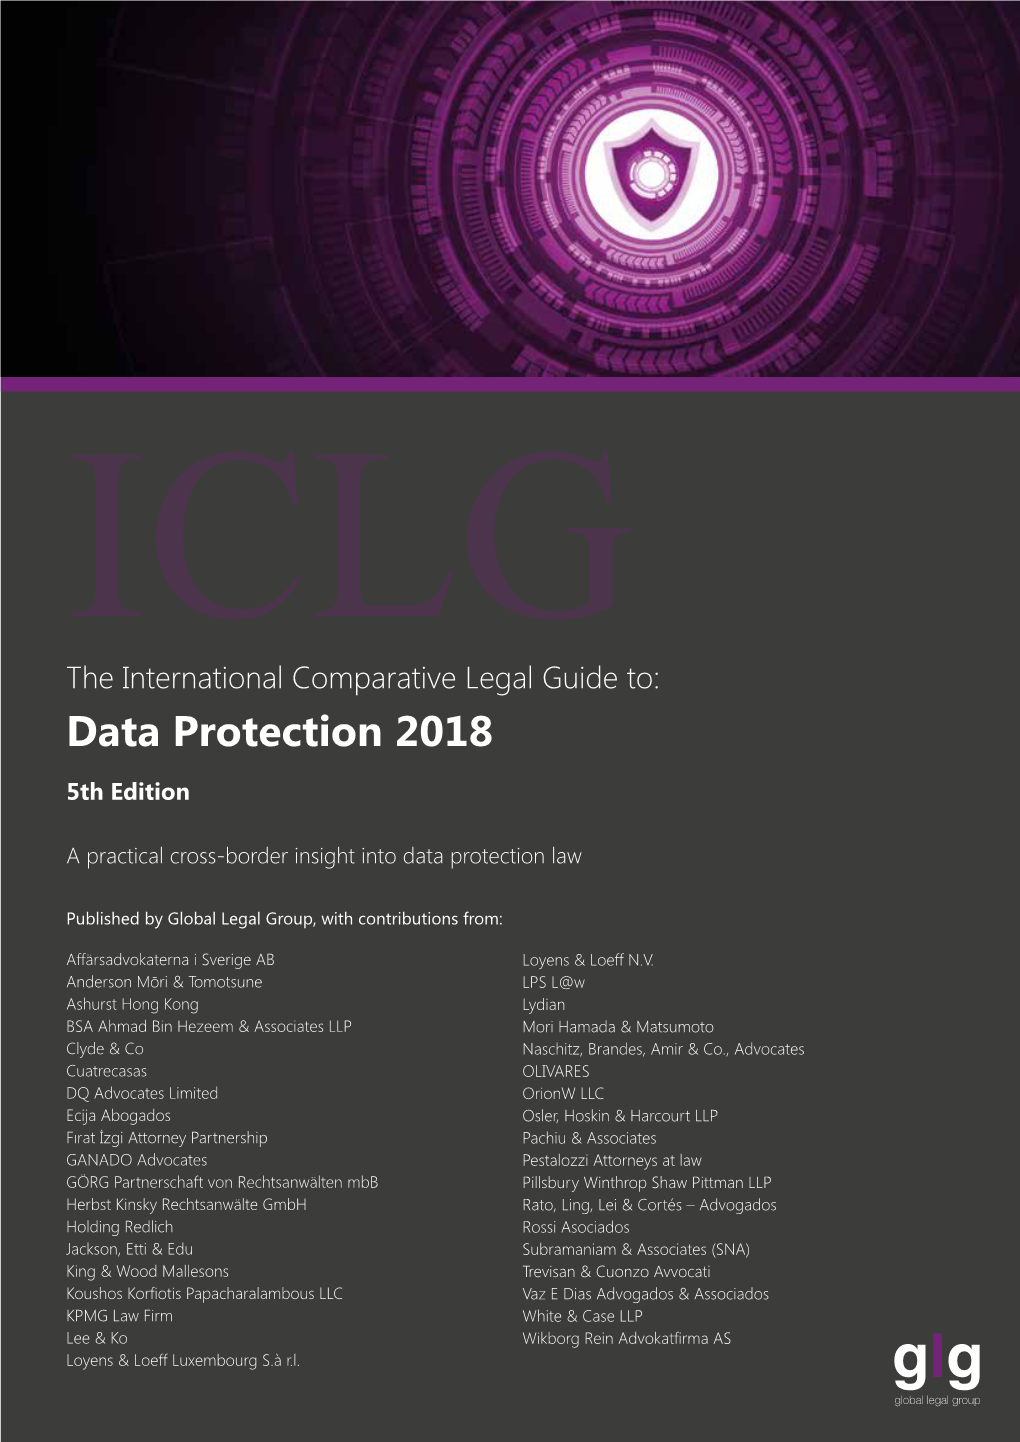 Data Protection Laws in Canada: 2018 Guide